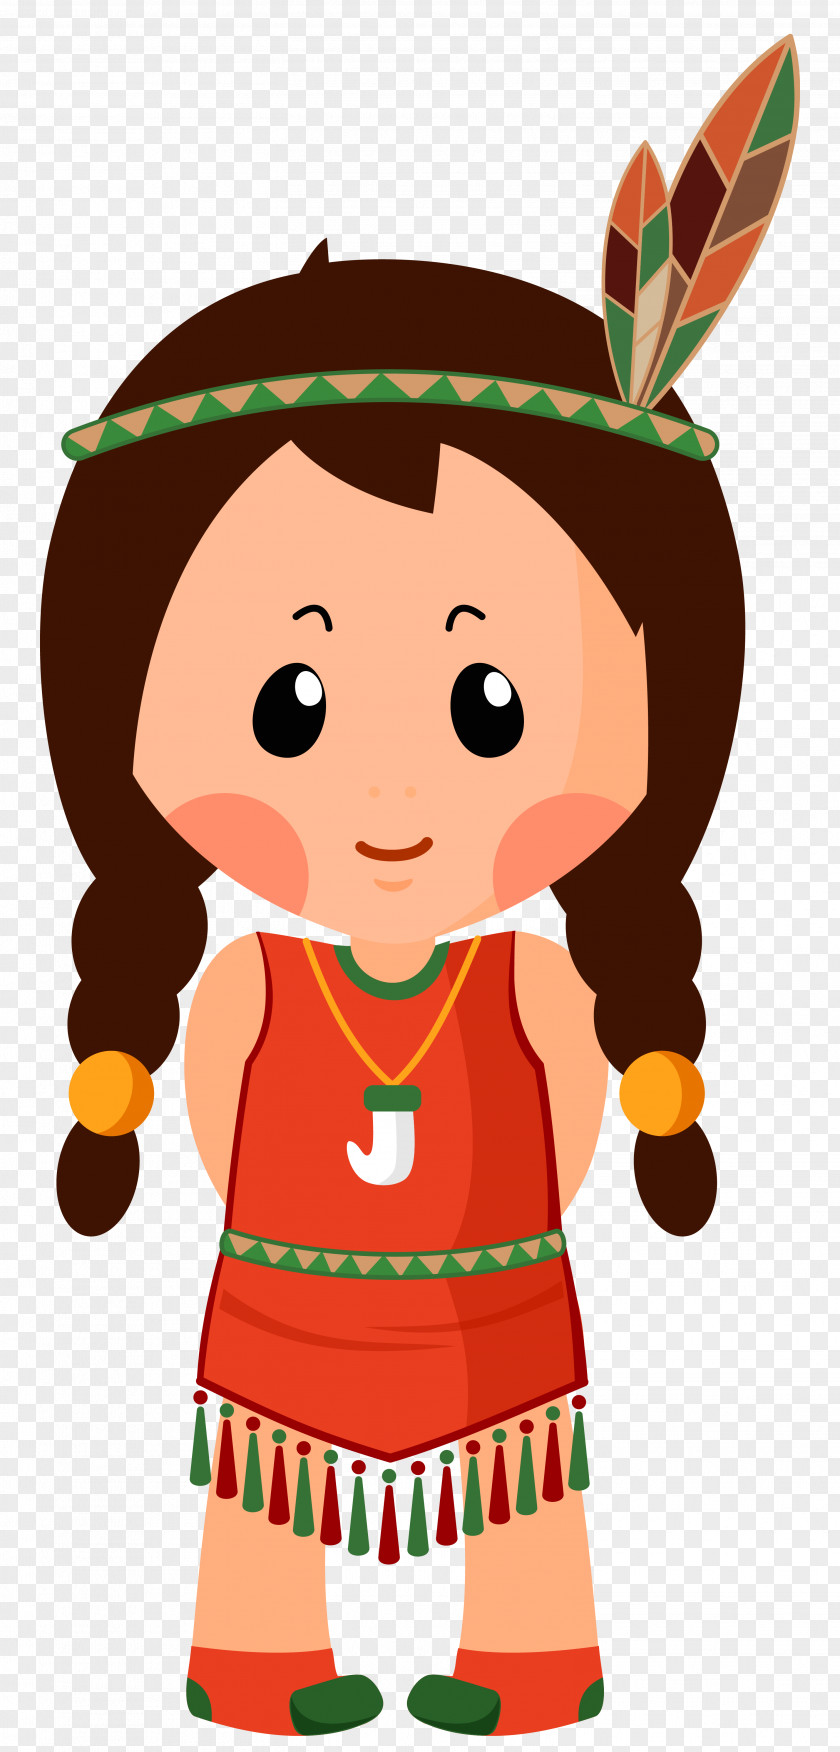 Native Americans In The United States Girl PNG in the , American Clipar animated native girl clipart PNG